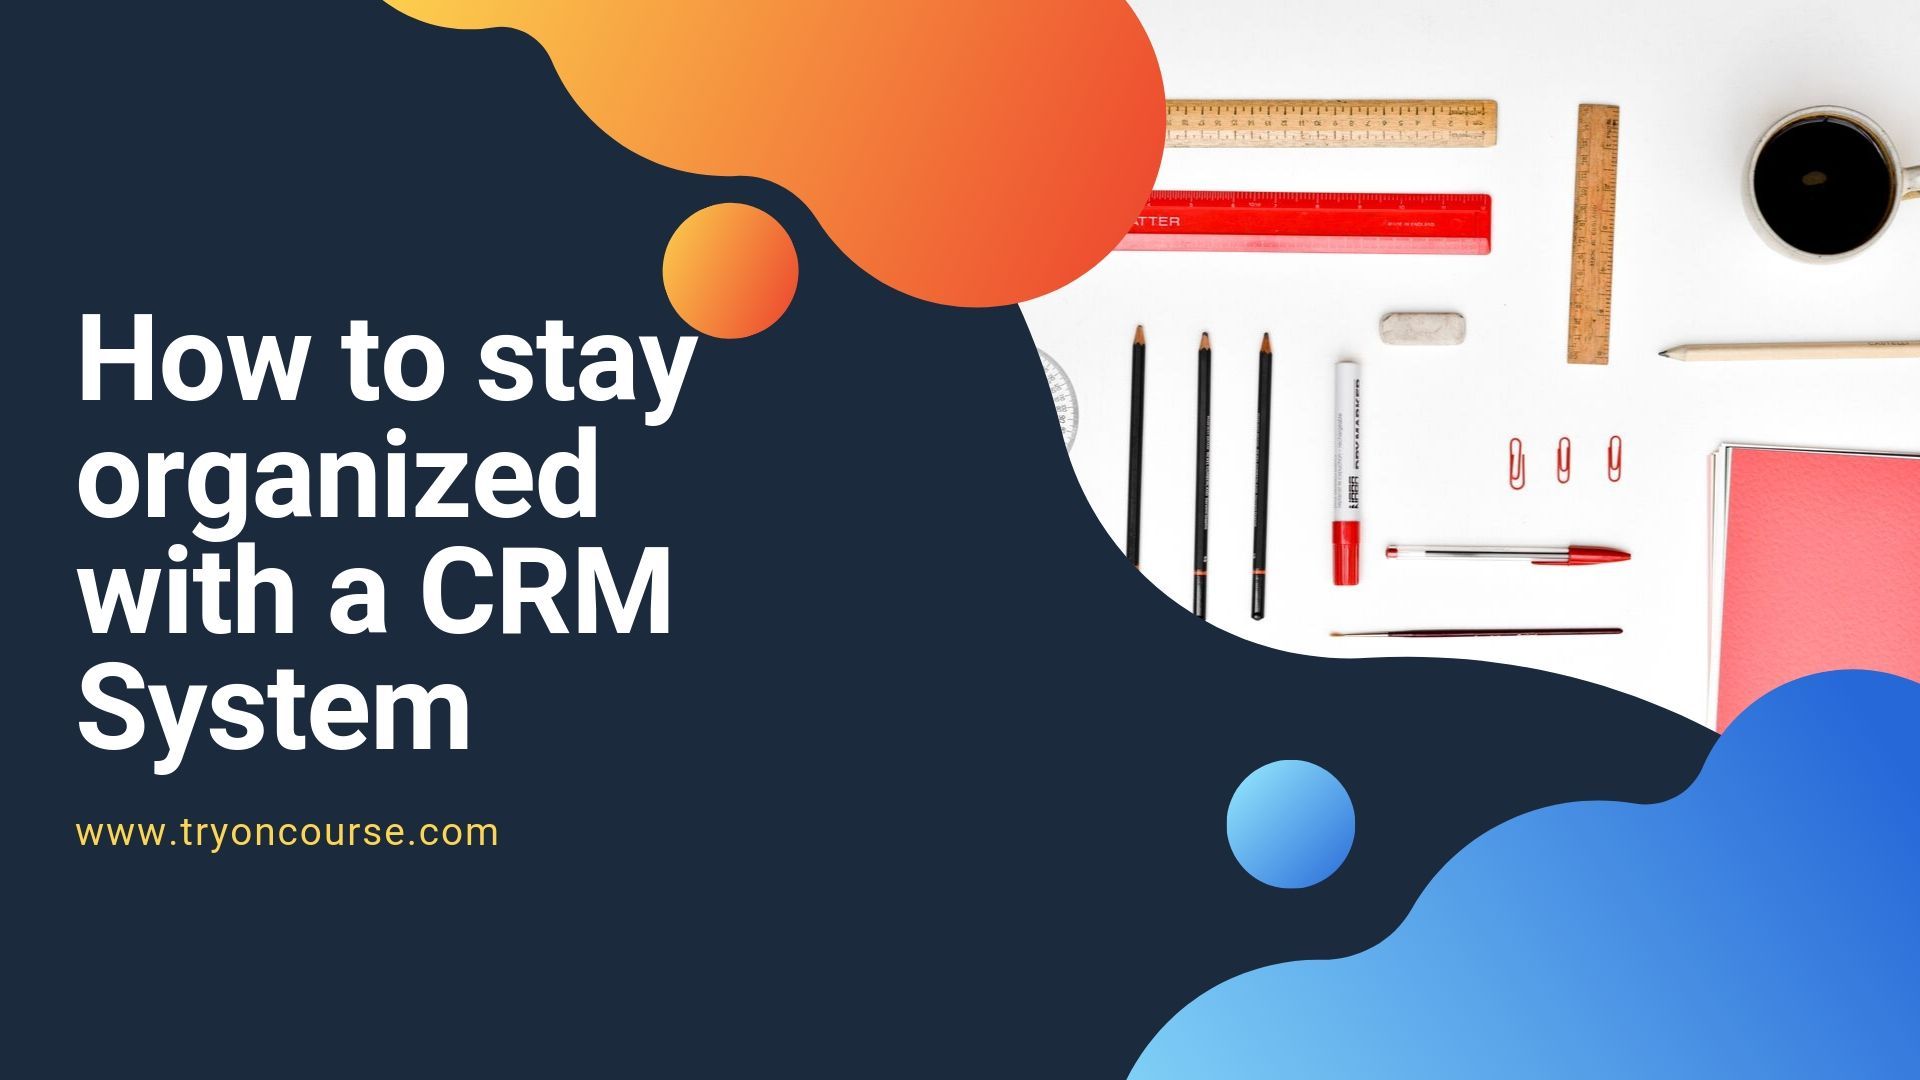 How to stay organized with a CRM System